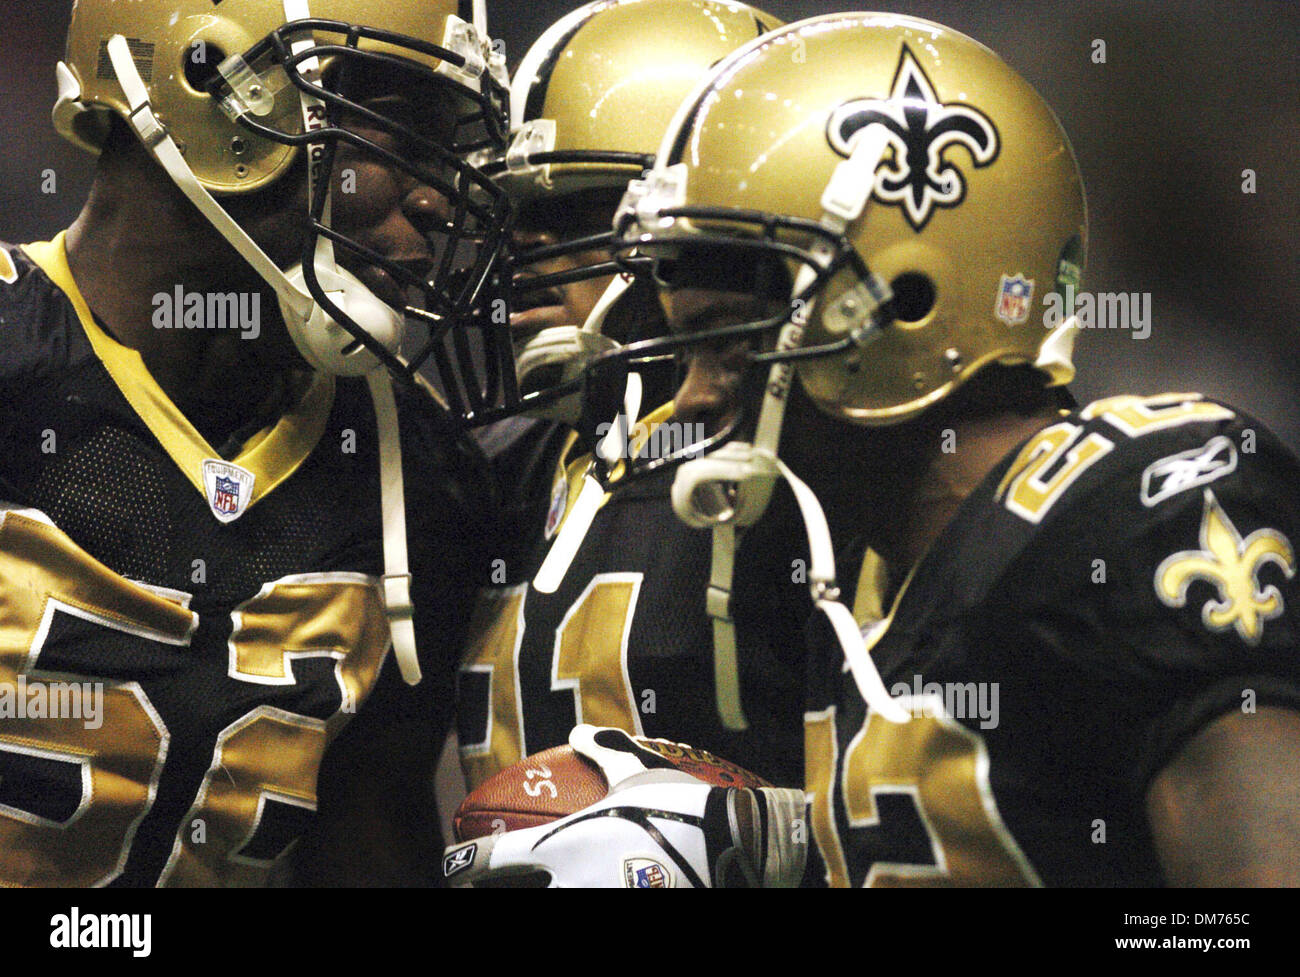 Oct 02, 2005; San Antonio, TX, USA; NFL Football: New Orleans Sains cornerback Jason Craft, middle, is congratulated by teammates Sedrick Hodge, left, and Fred Thomas, right after intercepting a pass during NFL action against the Buffalo Bills in the Alamodome on Sunday. The Saints lost the use of their home stadium, the Superdome, when Hurricane Katrina ravaged New Orleans on Aug. Stock Photo